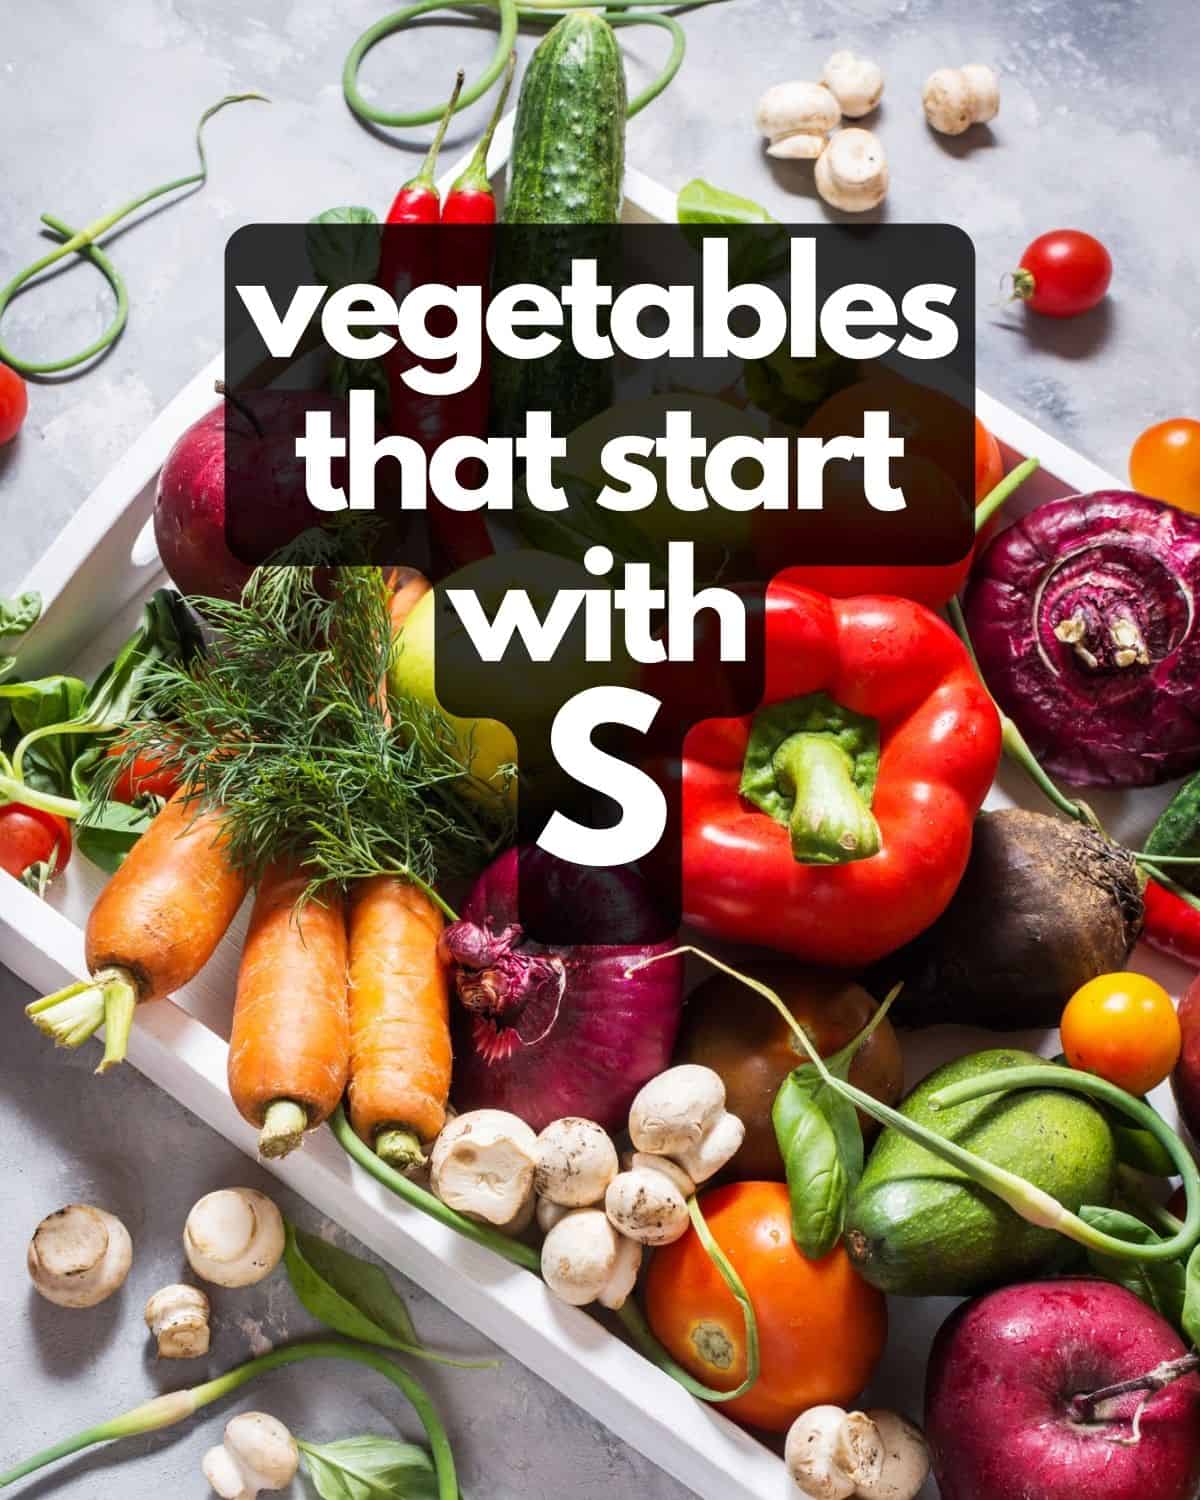 Table of vegetables, plus text: Vegetables that start with S.